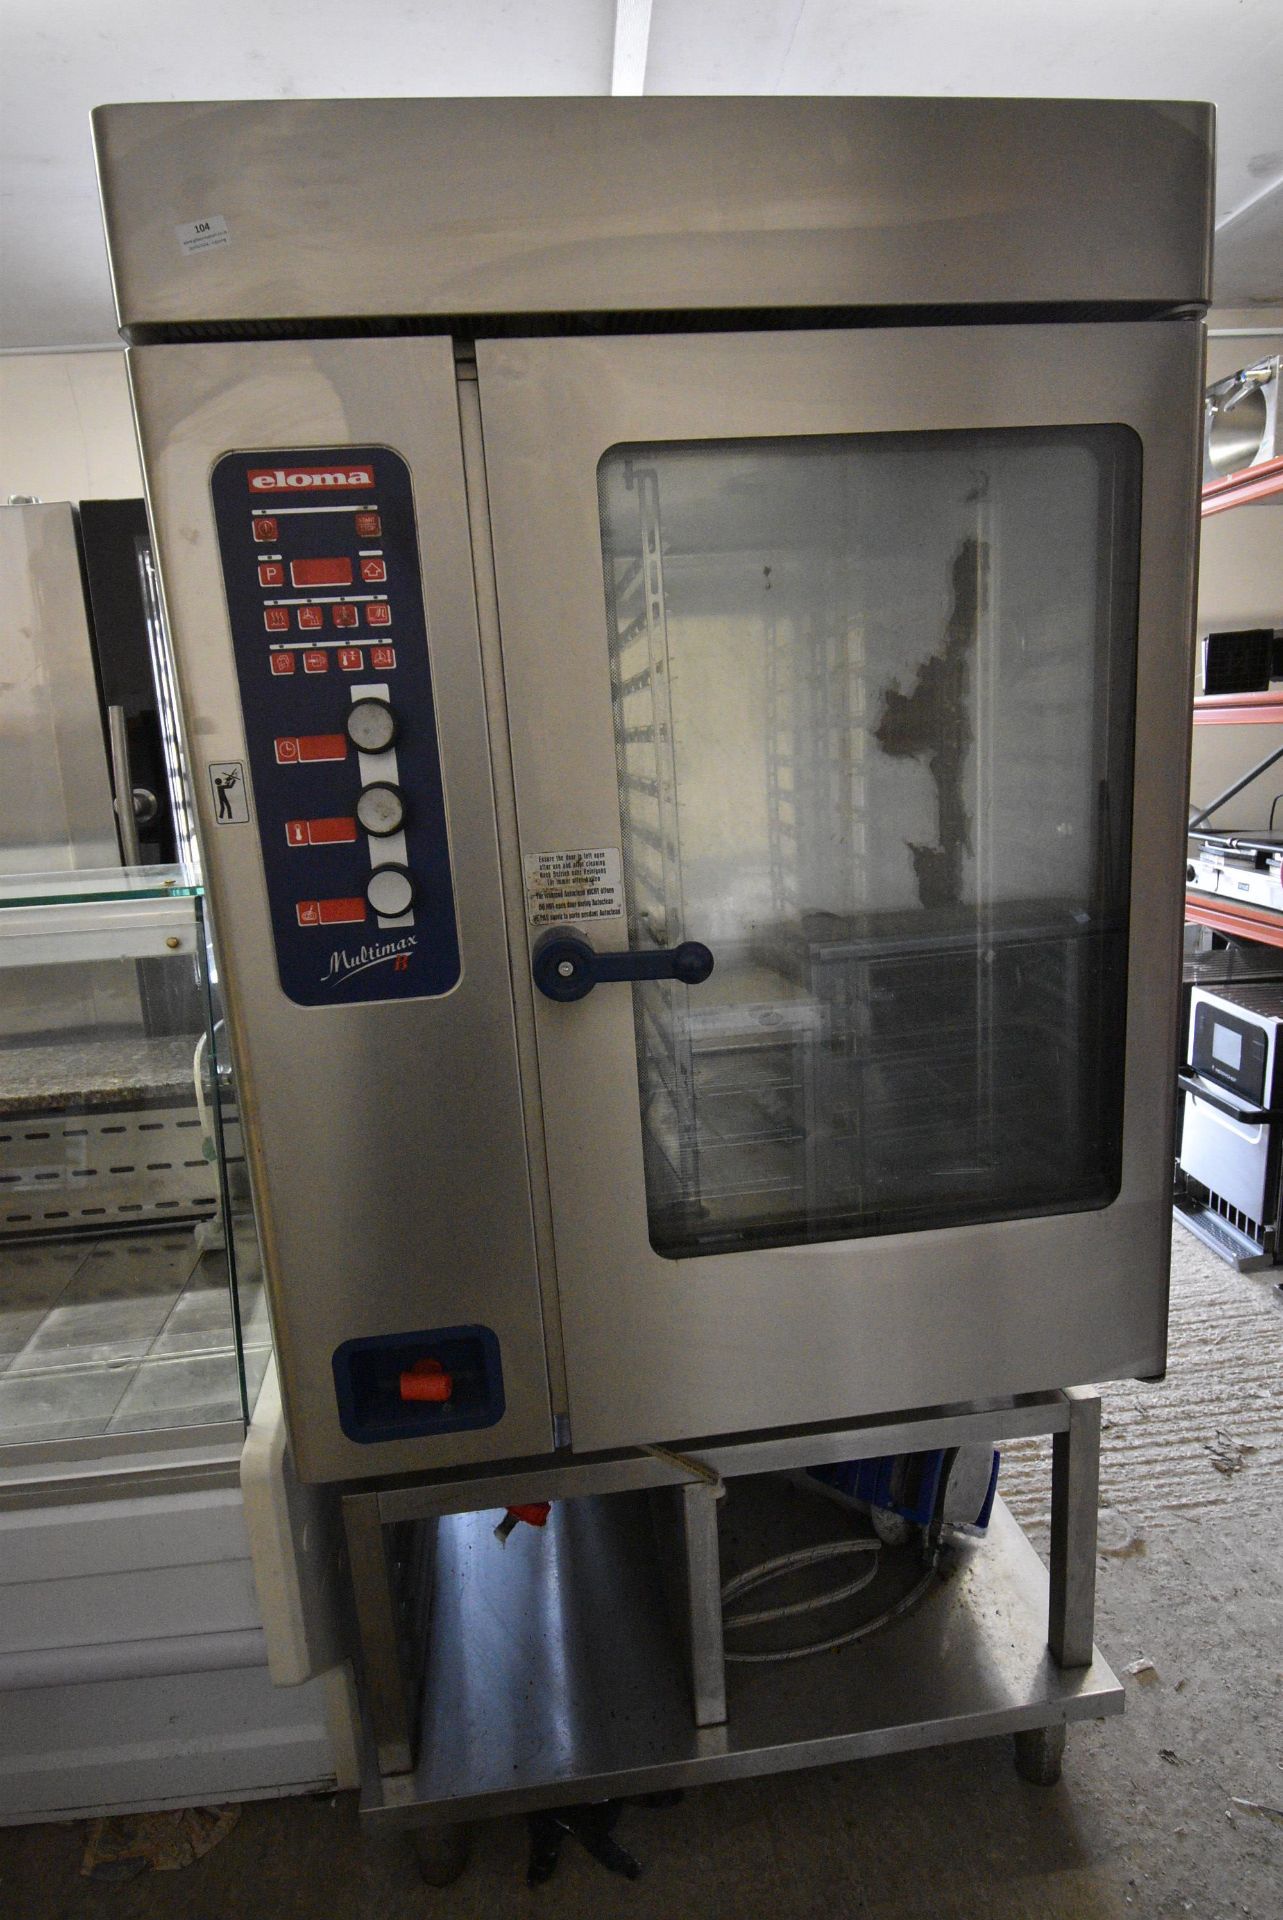 *Aloma Multimax B Self Cleaning Oven